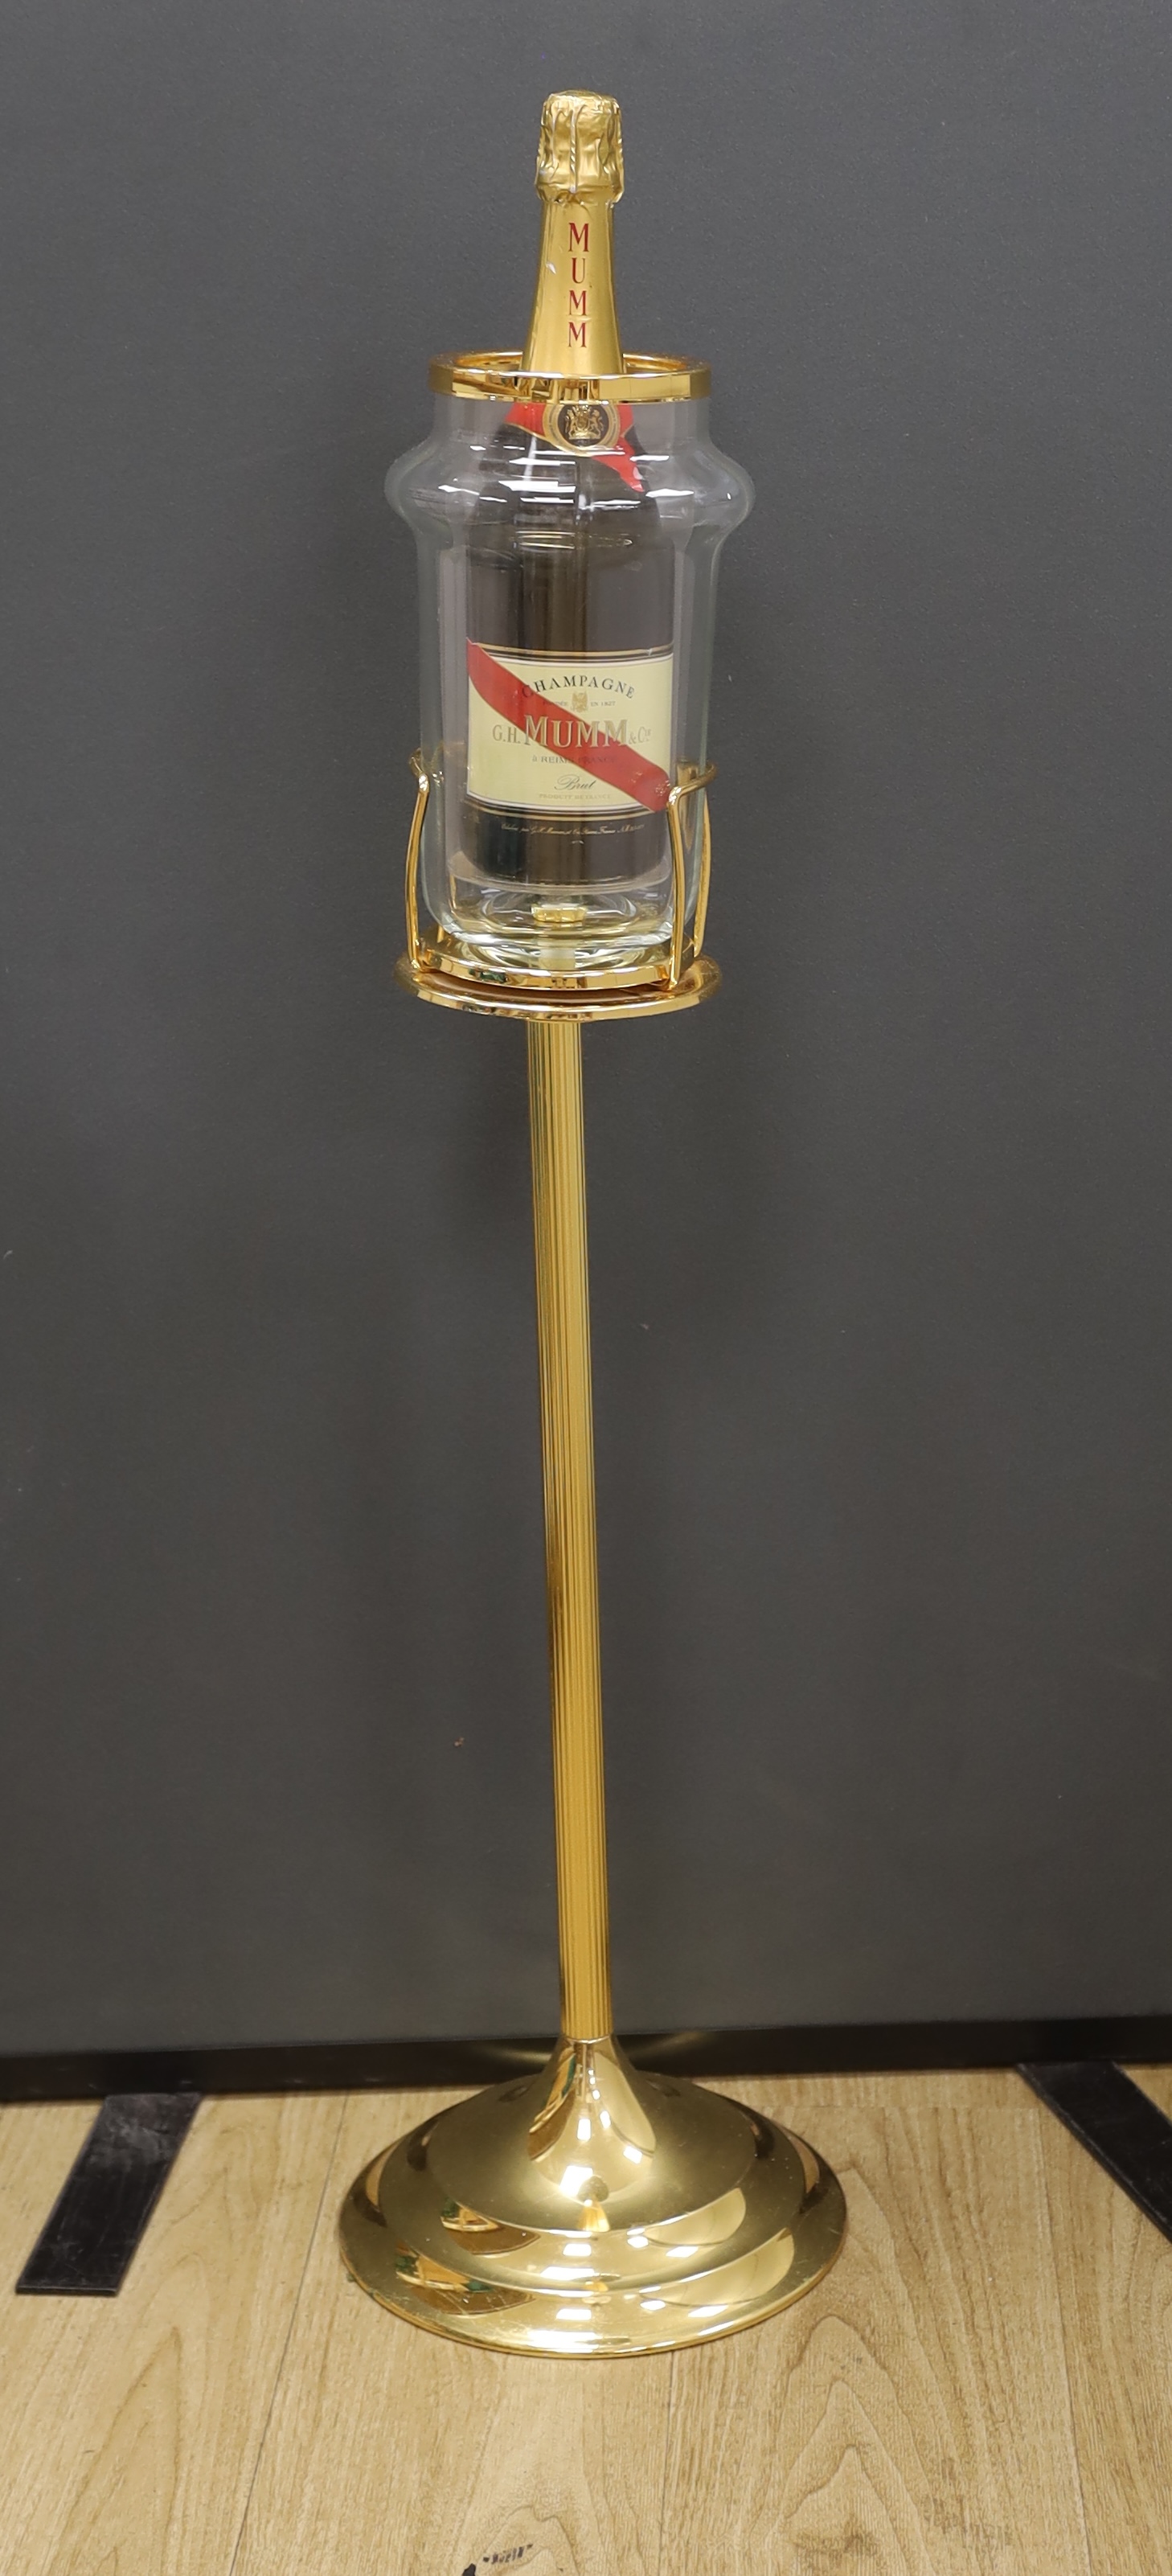 A wine cooler on pedestal, marked Faugeron, Paris, with a bottle of Mumm Champagne, 89cm high. Condition- fair, base of bottle holder needs straightening.